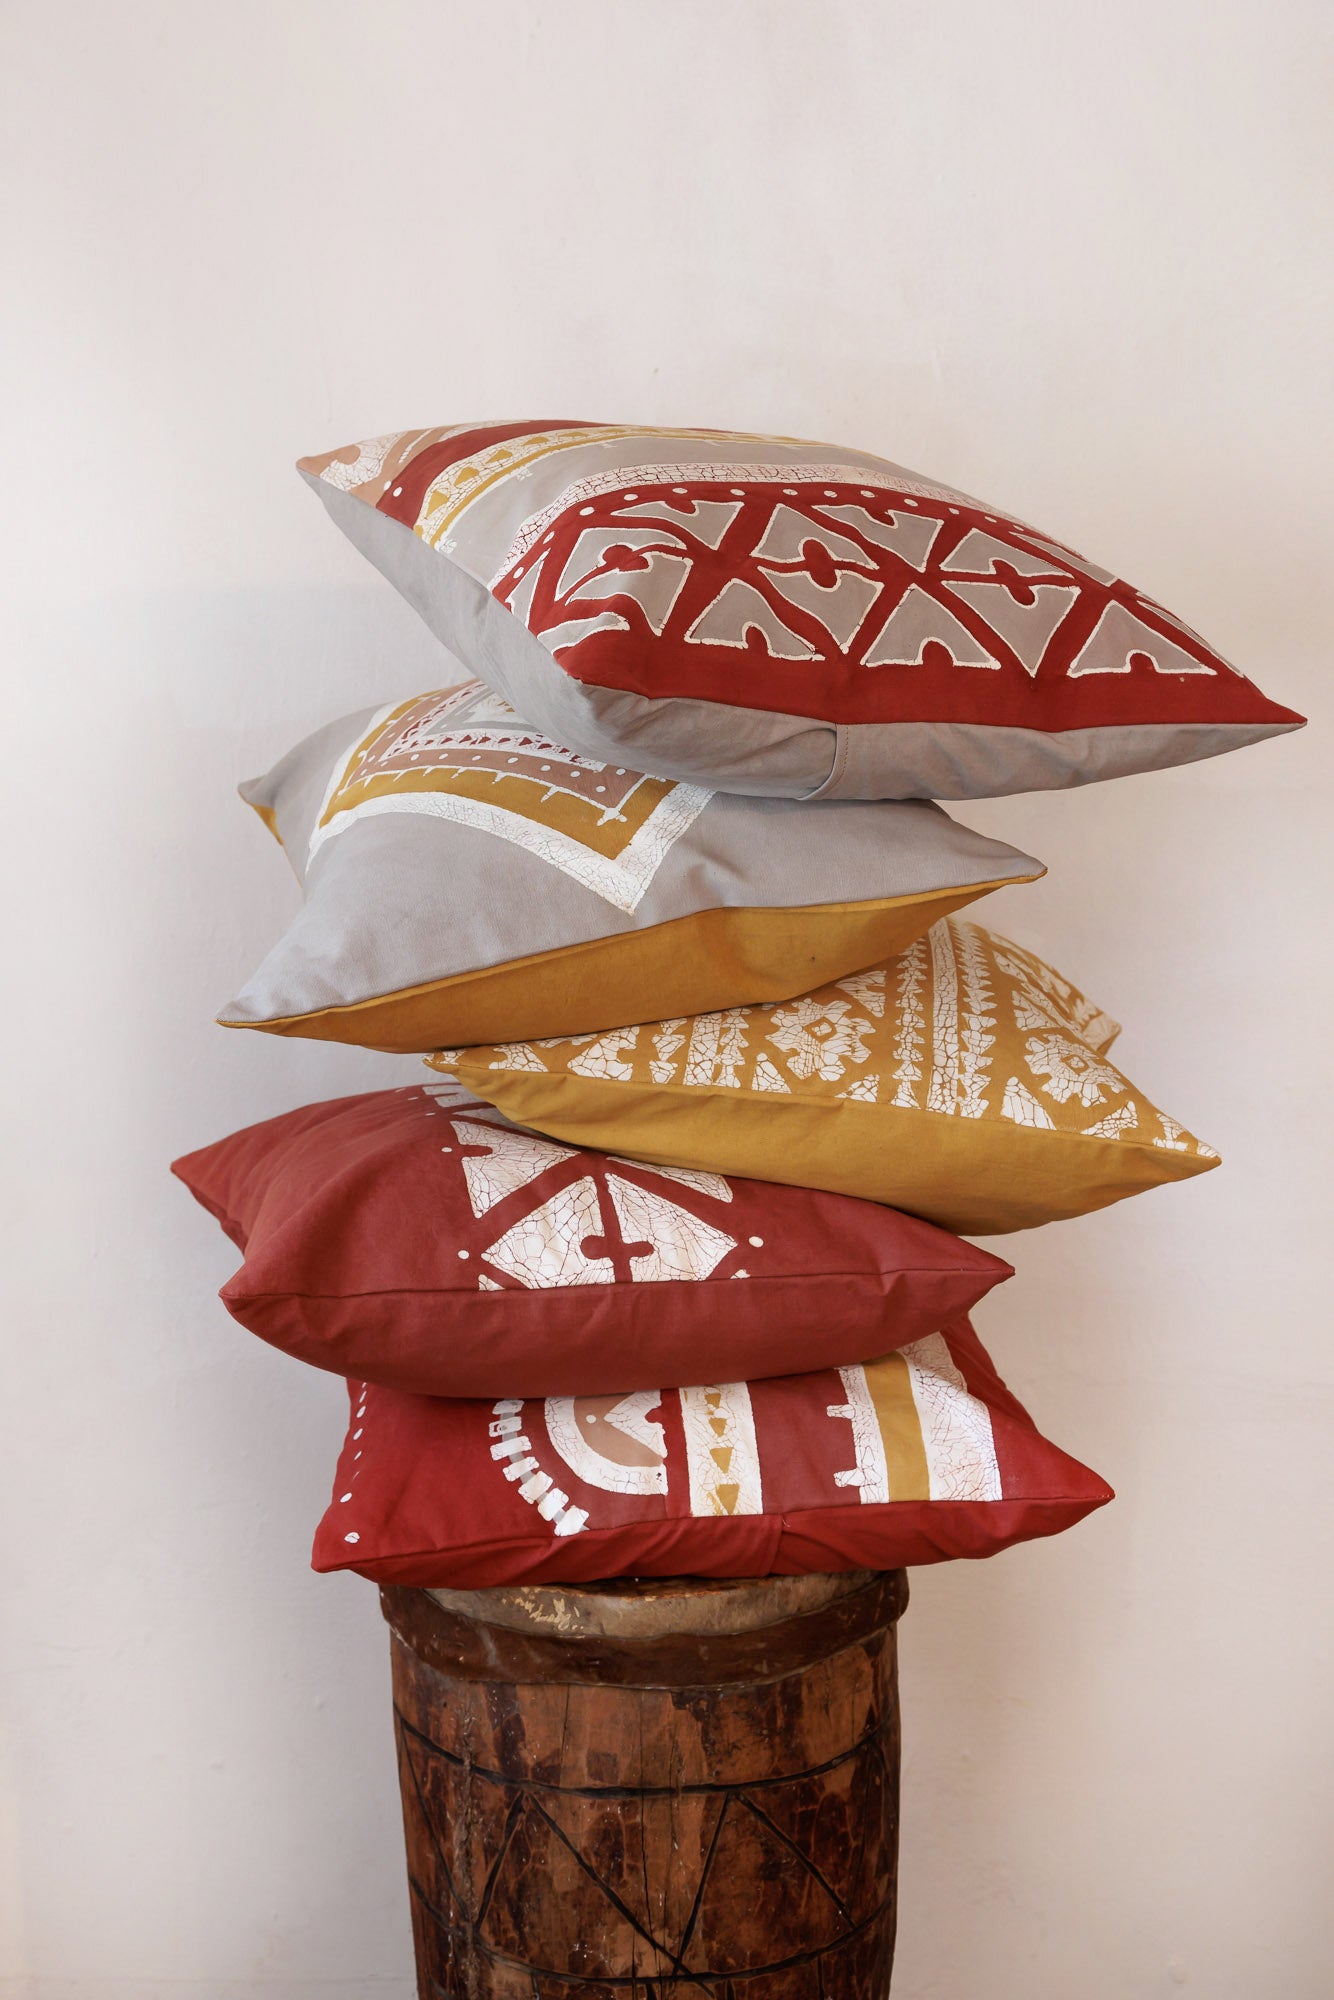 Atlas Arches Cushion Cover - Handmade by TRIBAL TEXTILES - Handcrafted Home Decor Interiors - African Made